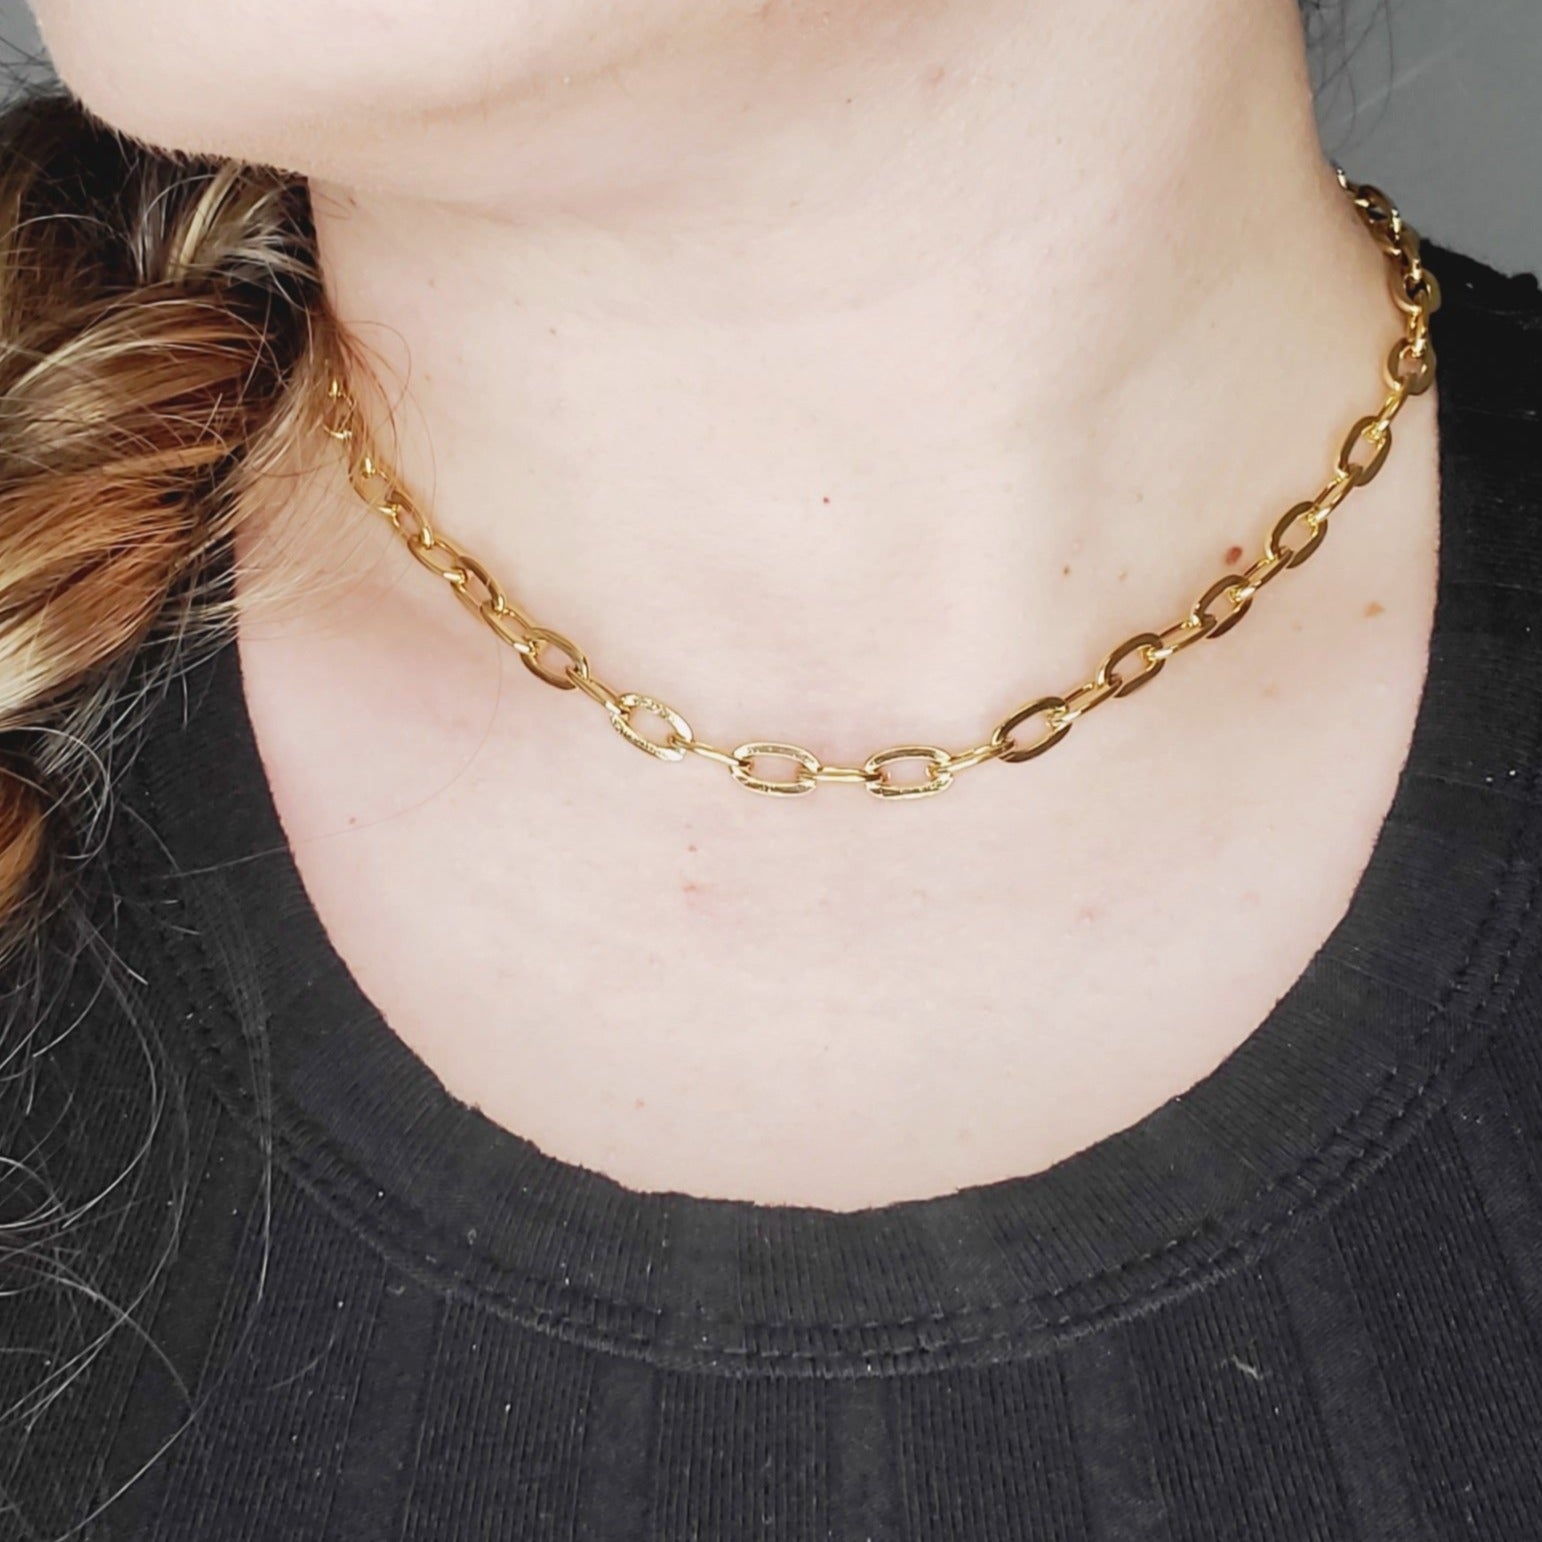 Best Gold Choker Chain Necklace for Women | Bold Vintage Gold Dainty Cuban Choker Necklace | Best Gold Jewelry Gift | Best Aesthetic Yellow Gold Chain